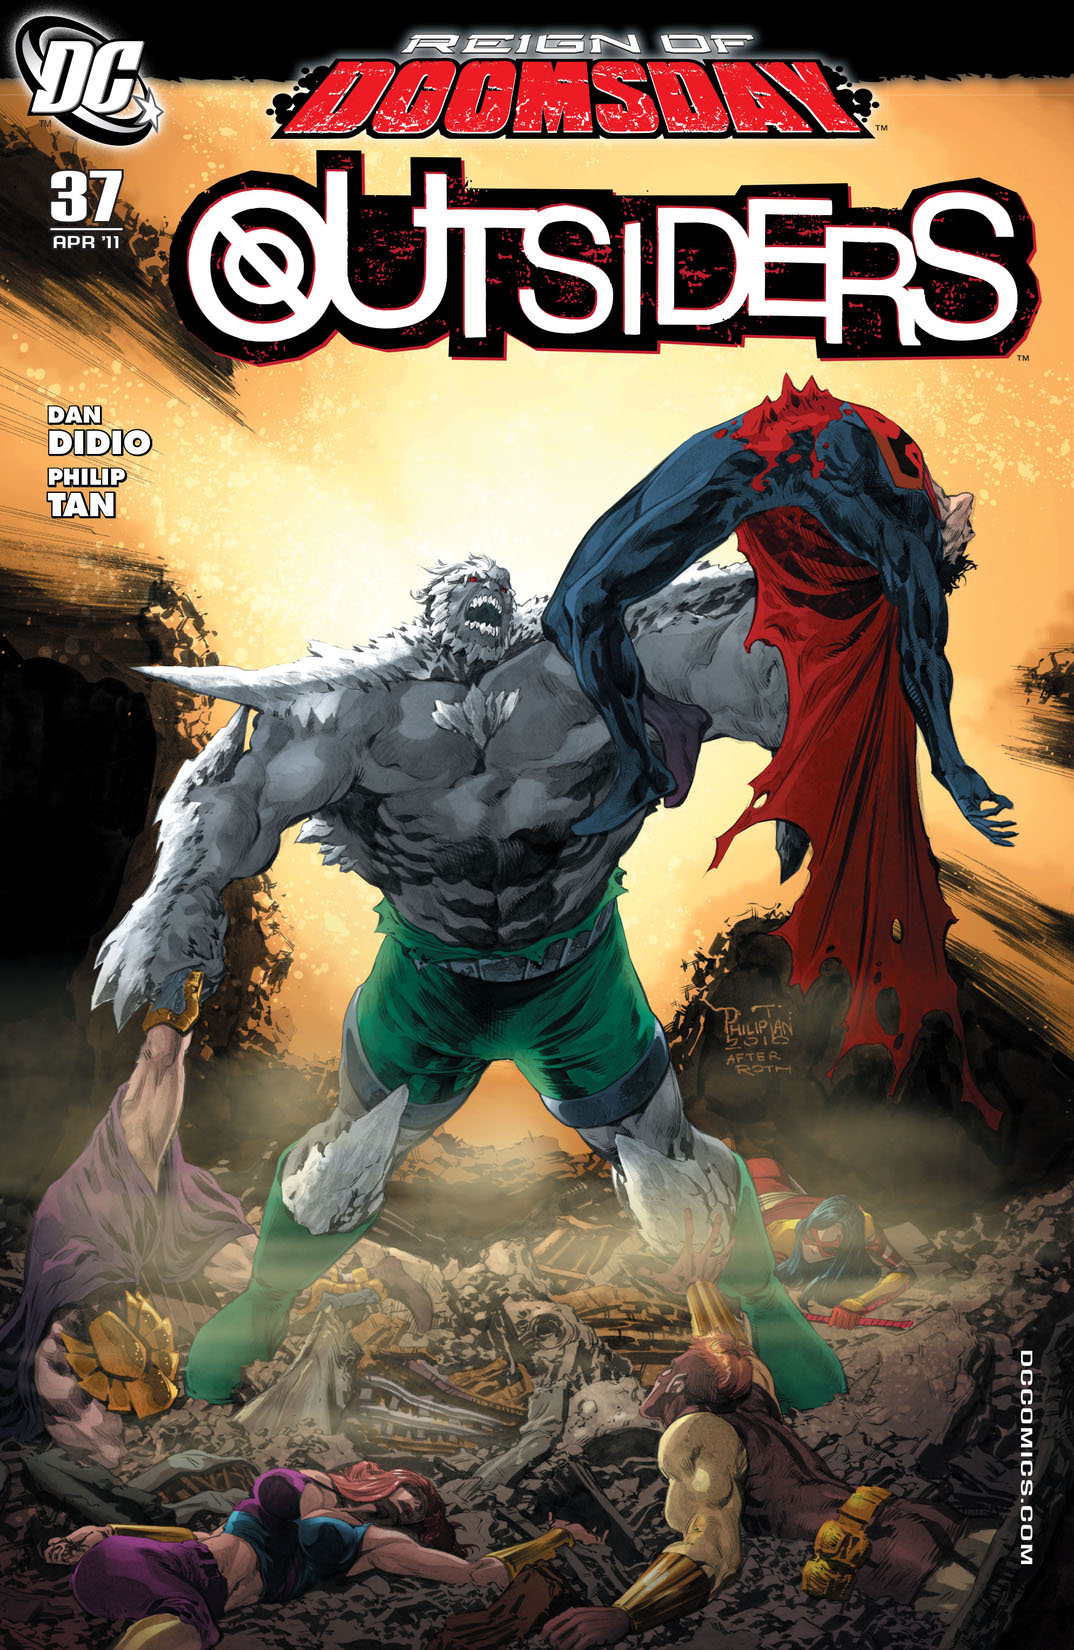 The Outsiders (2009-) #37 preview images